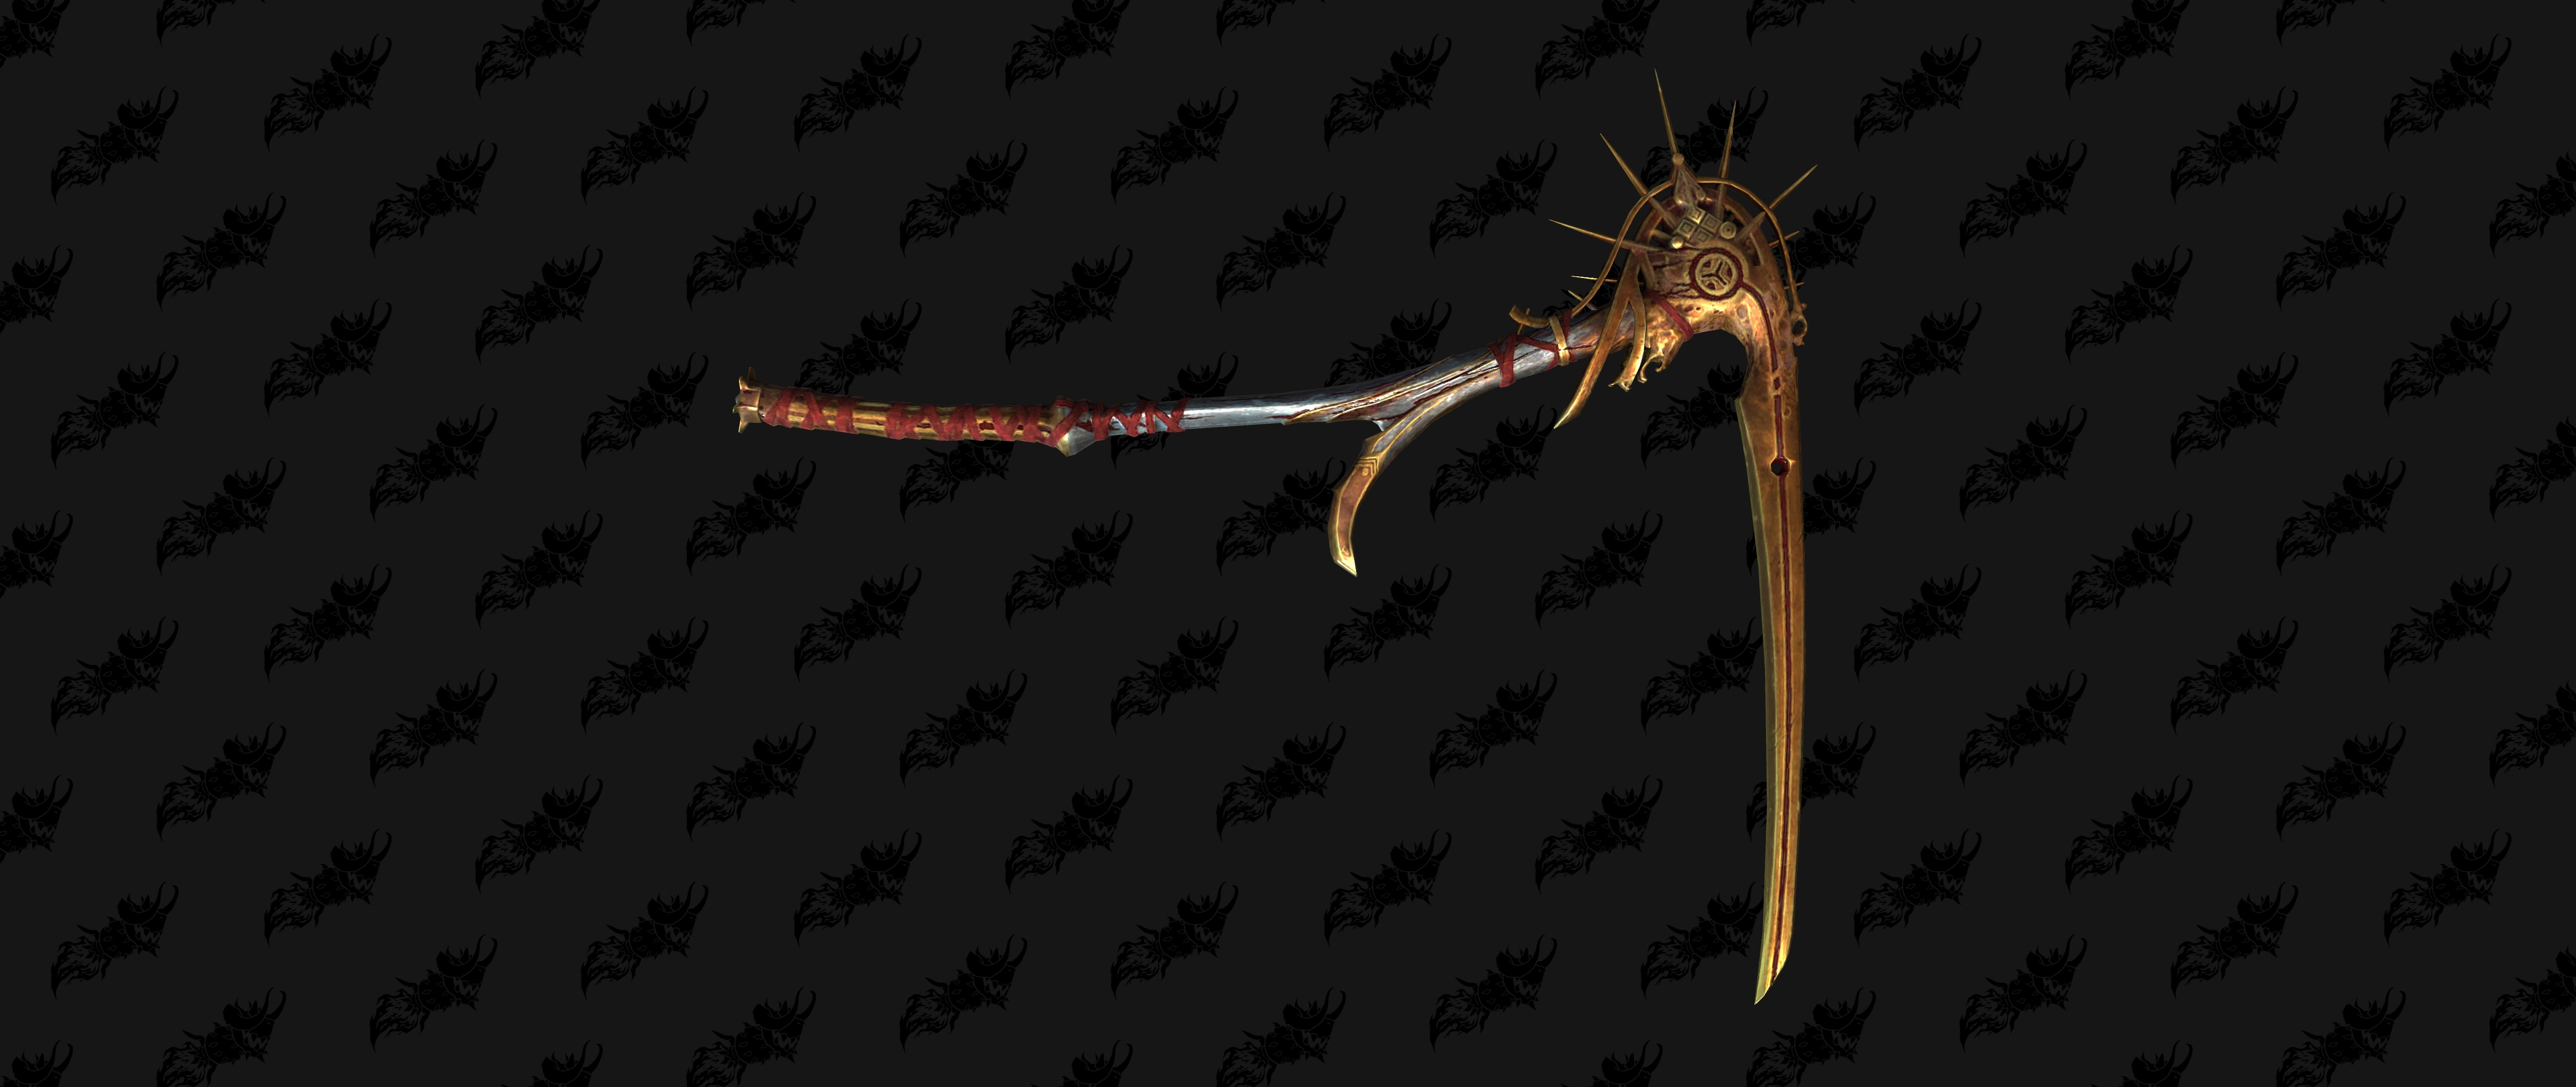 New Diablo 4 Necromancer Shop Sets - Coven of the Blood Saint, Veins of the  Blood Saint, Hellgate Inquisitor - Wowhead News